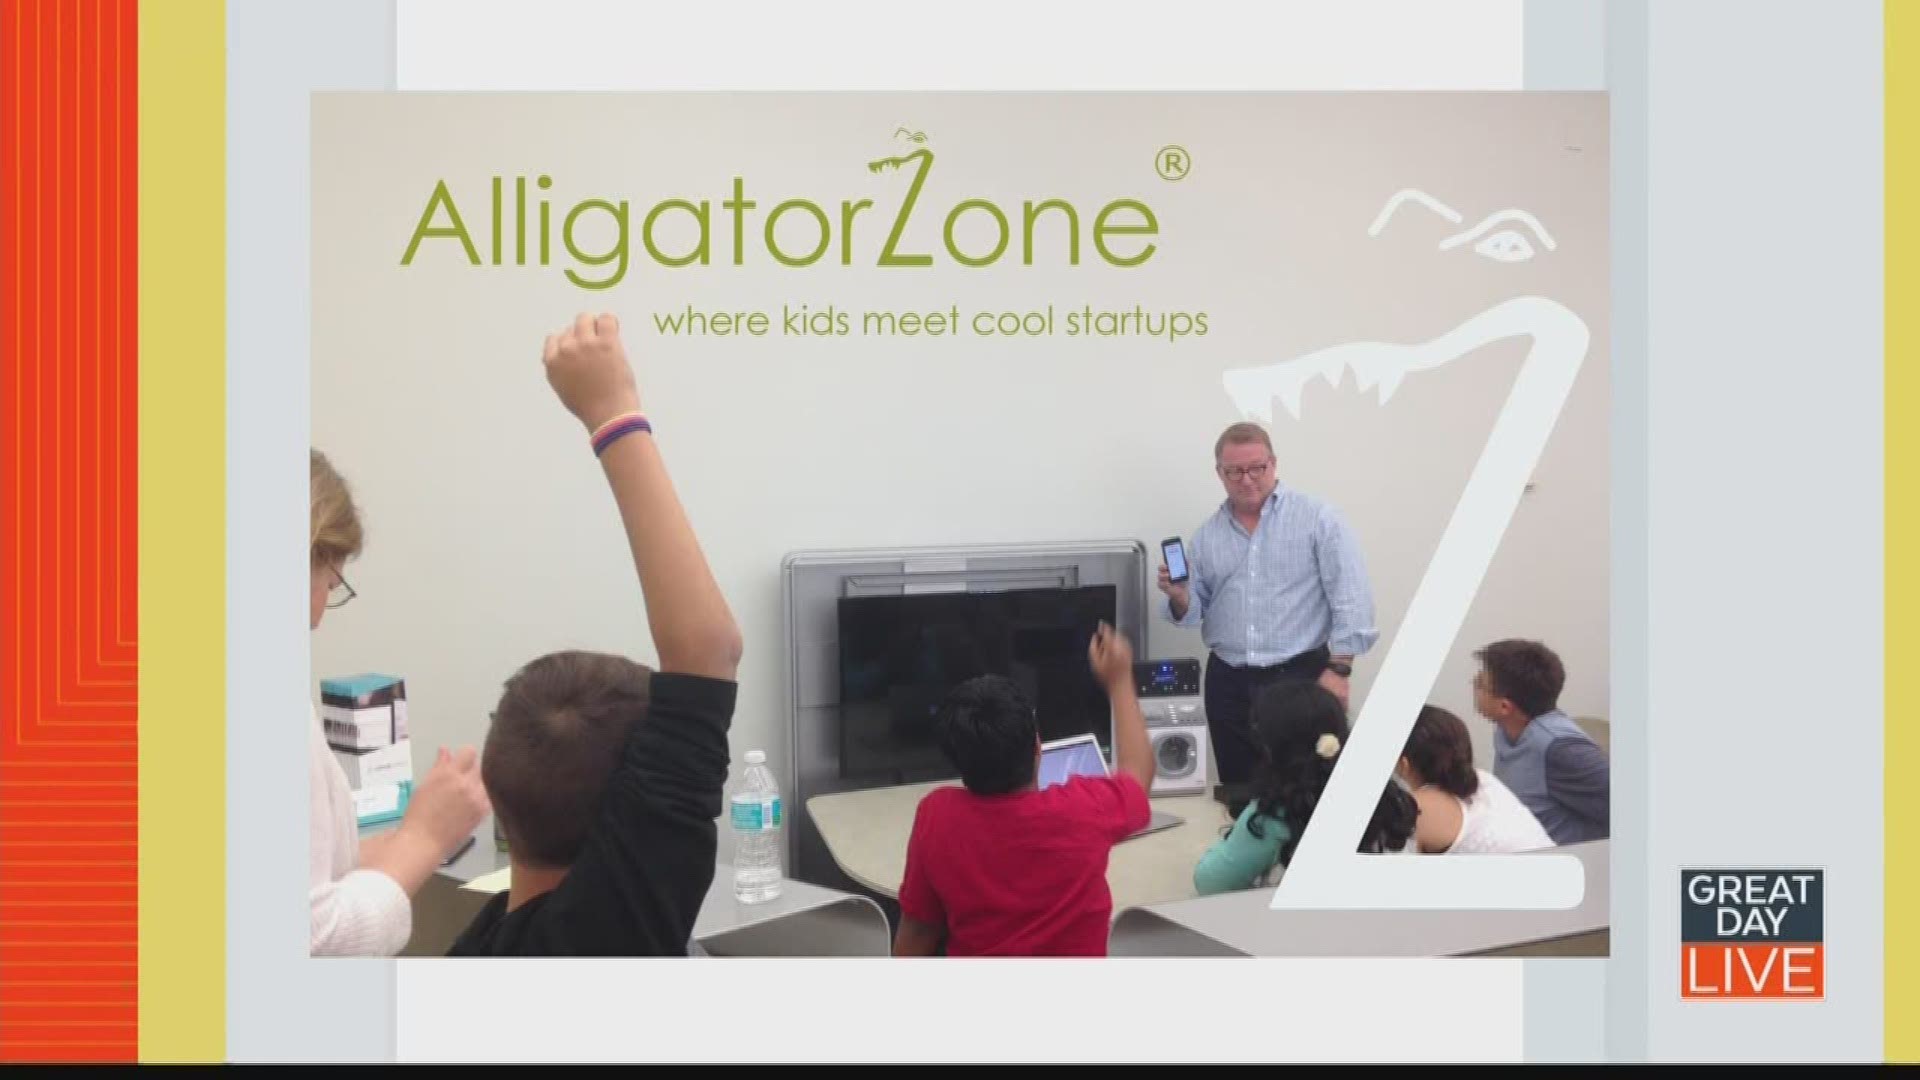 For more information go to alligatorzone.org